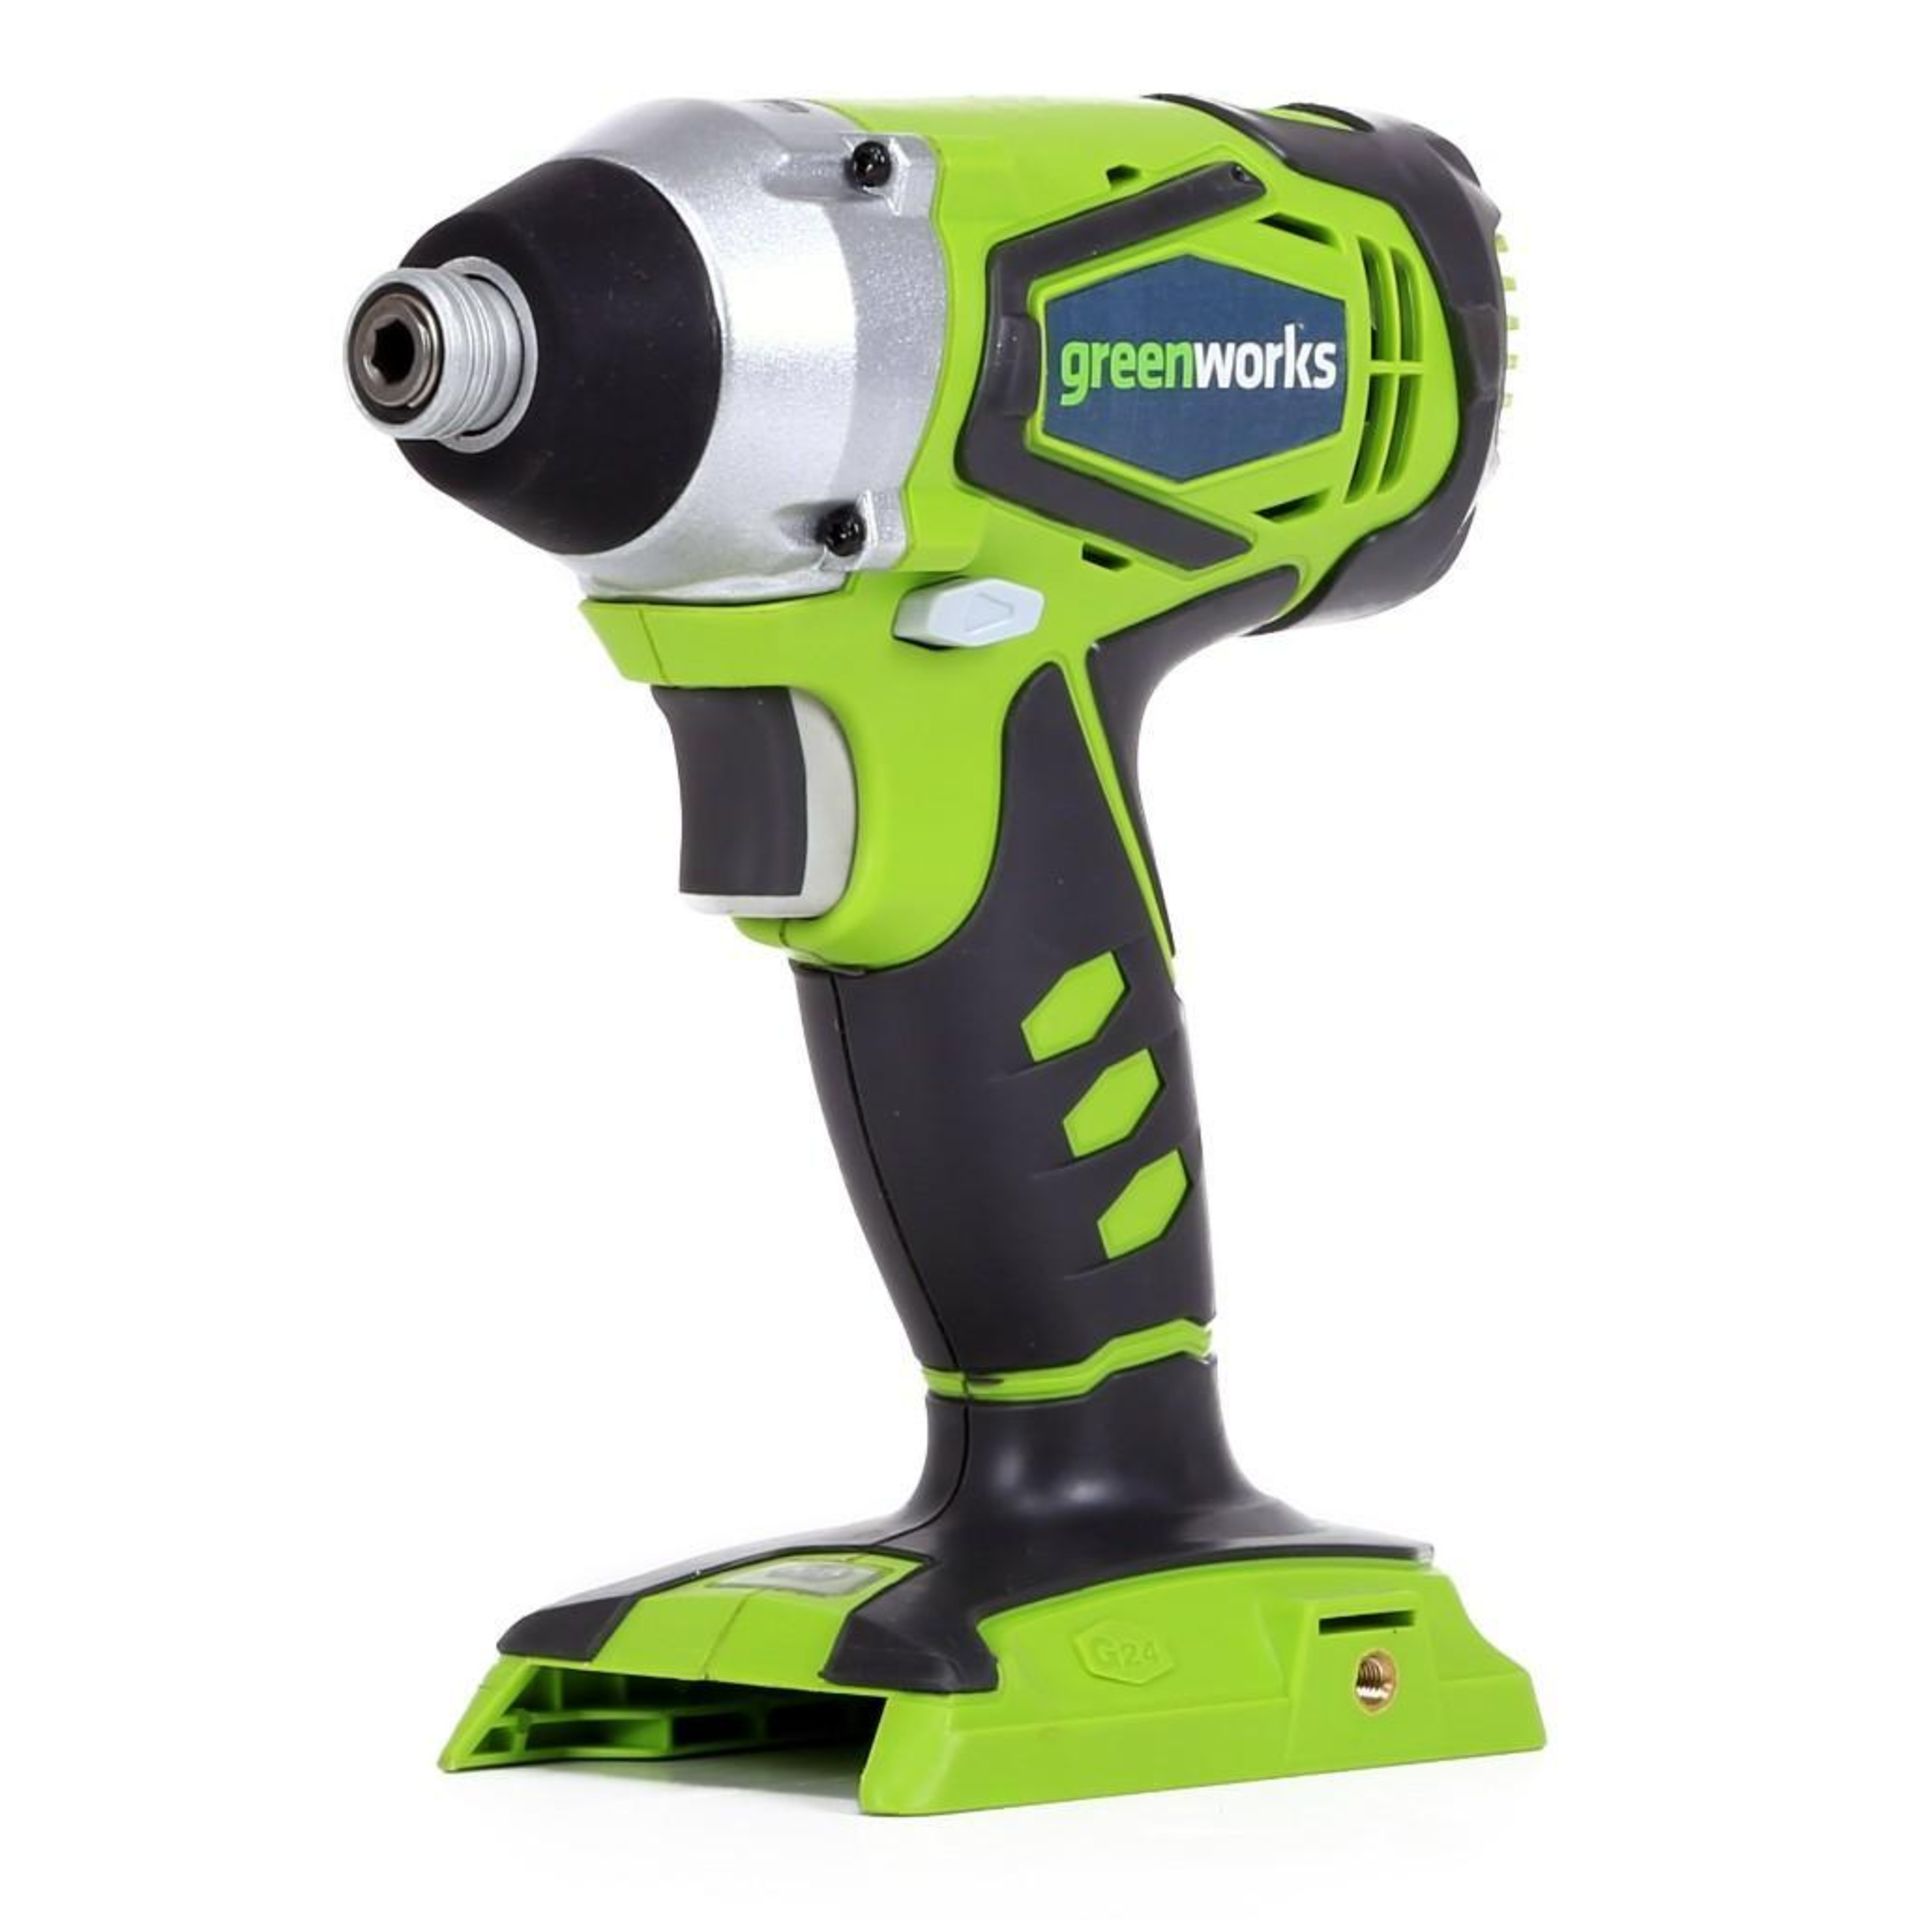 Boxed Green works 24V Cordless Impact Driver G24ID RRP £49.99